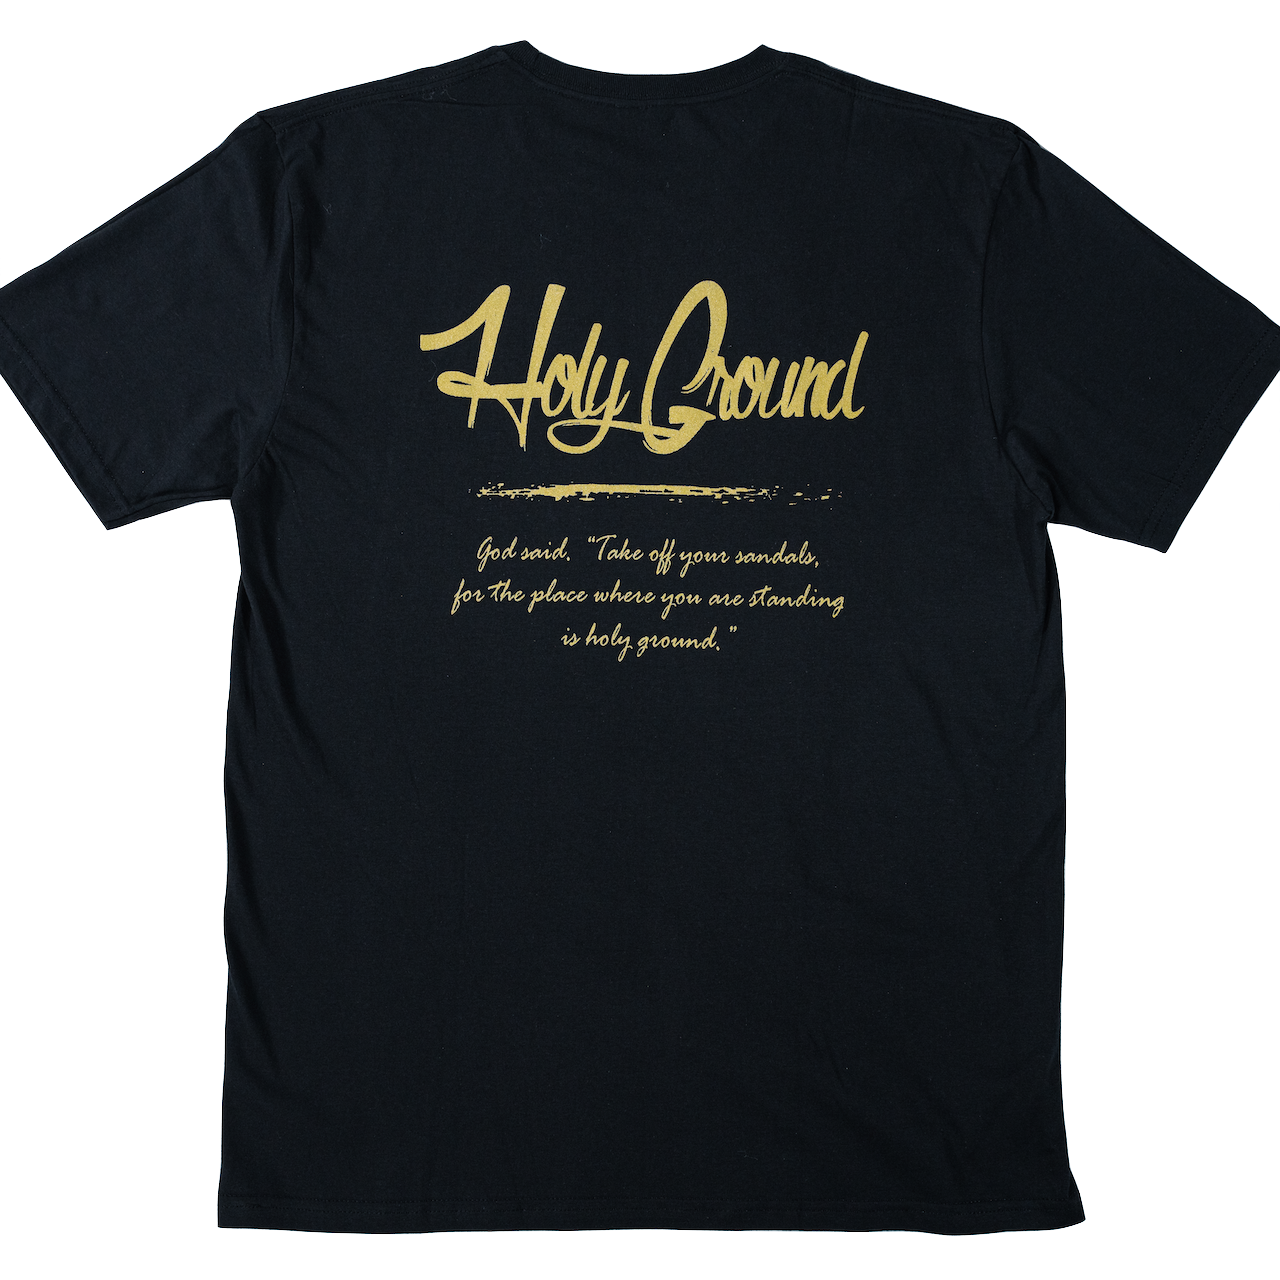 Short Sleeve Black T-Shirt with Gold